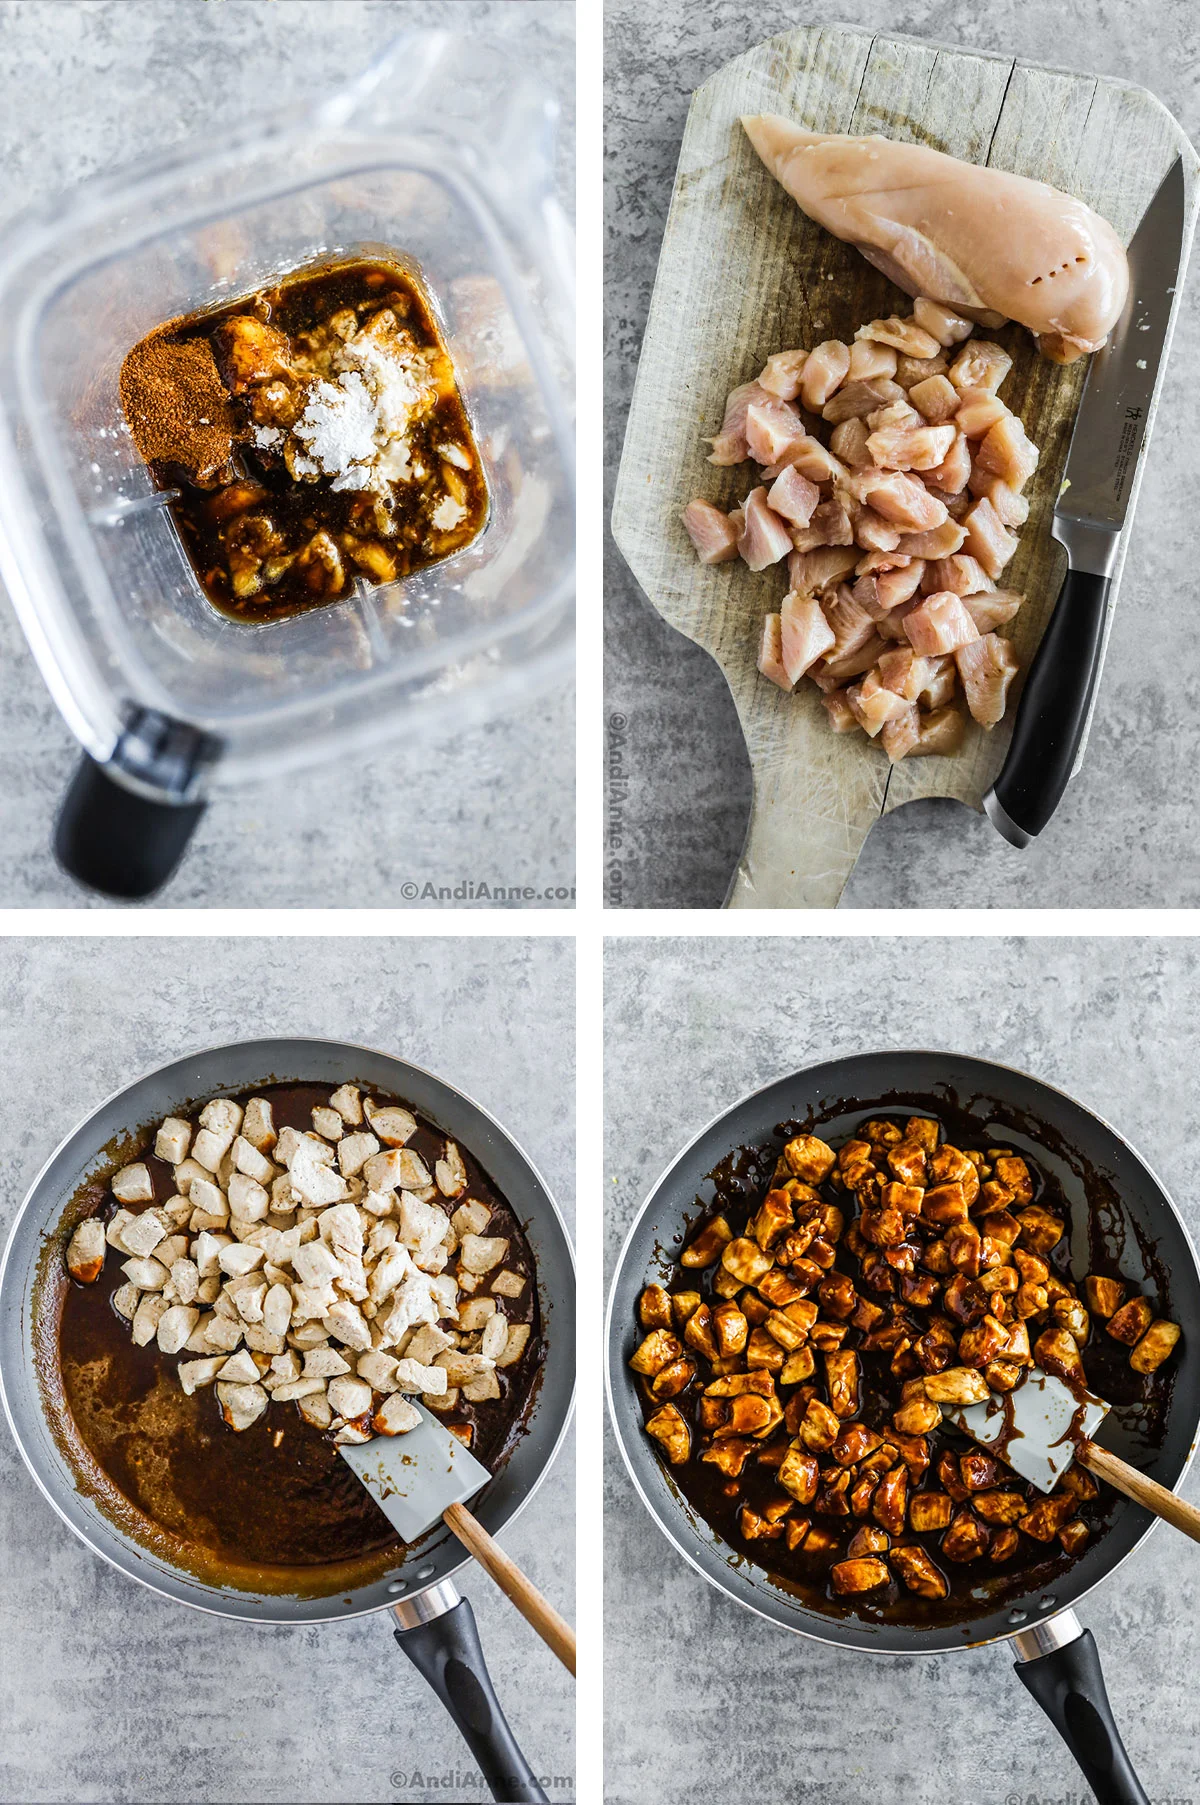 Four images together, first is a blender with liquid ingredients dumped in, second is chopped chicken with a knife on a cutting board, third is cooked chopped chicken dumped over brown sauce in frying pan, fourth is chicken pieces tossed in a brown sauce in frying pan.